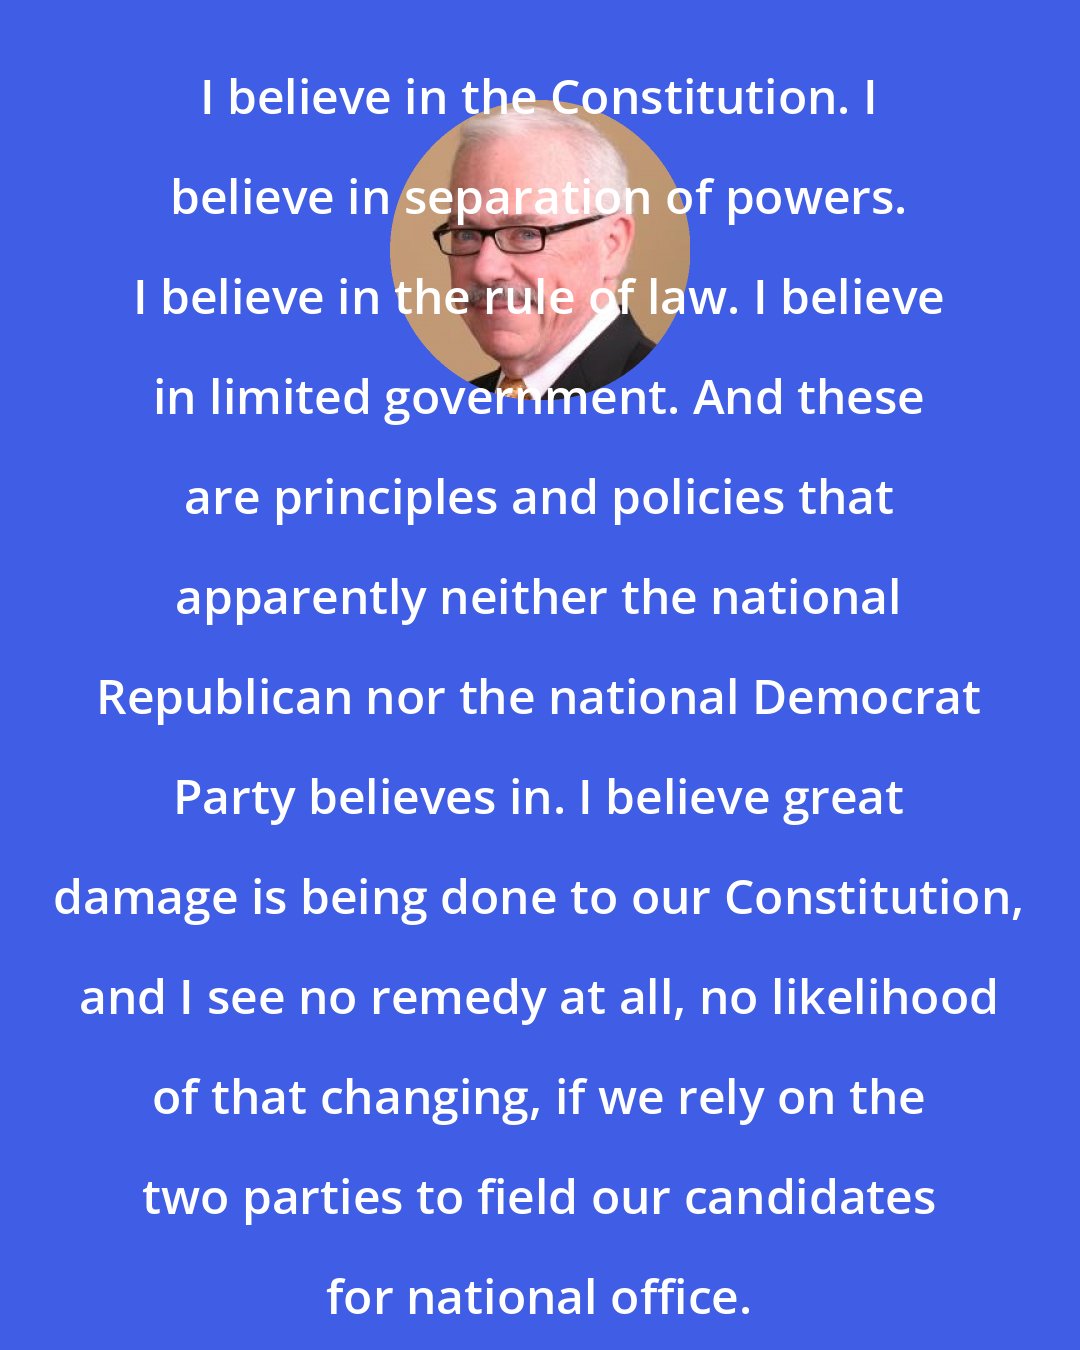 Bob Barr: I believe in the Constitution. I believe in separation of powers. I believe in the rule of law. I believe in limited government. And these are principles and policies that apparently neither the national Republican nor the national Democrat Party believes in. I believe great damage is being done to our Constitution, and I see no remedy at all, no likelihood of that changing, if we rely on the two parties to field our candidates for national office.